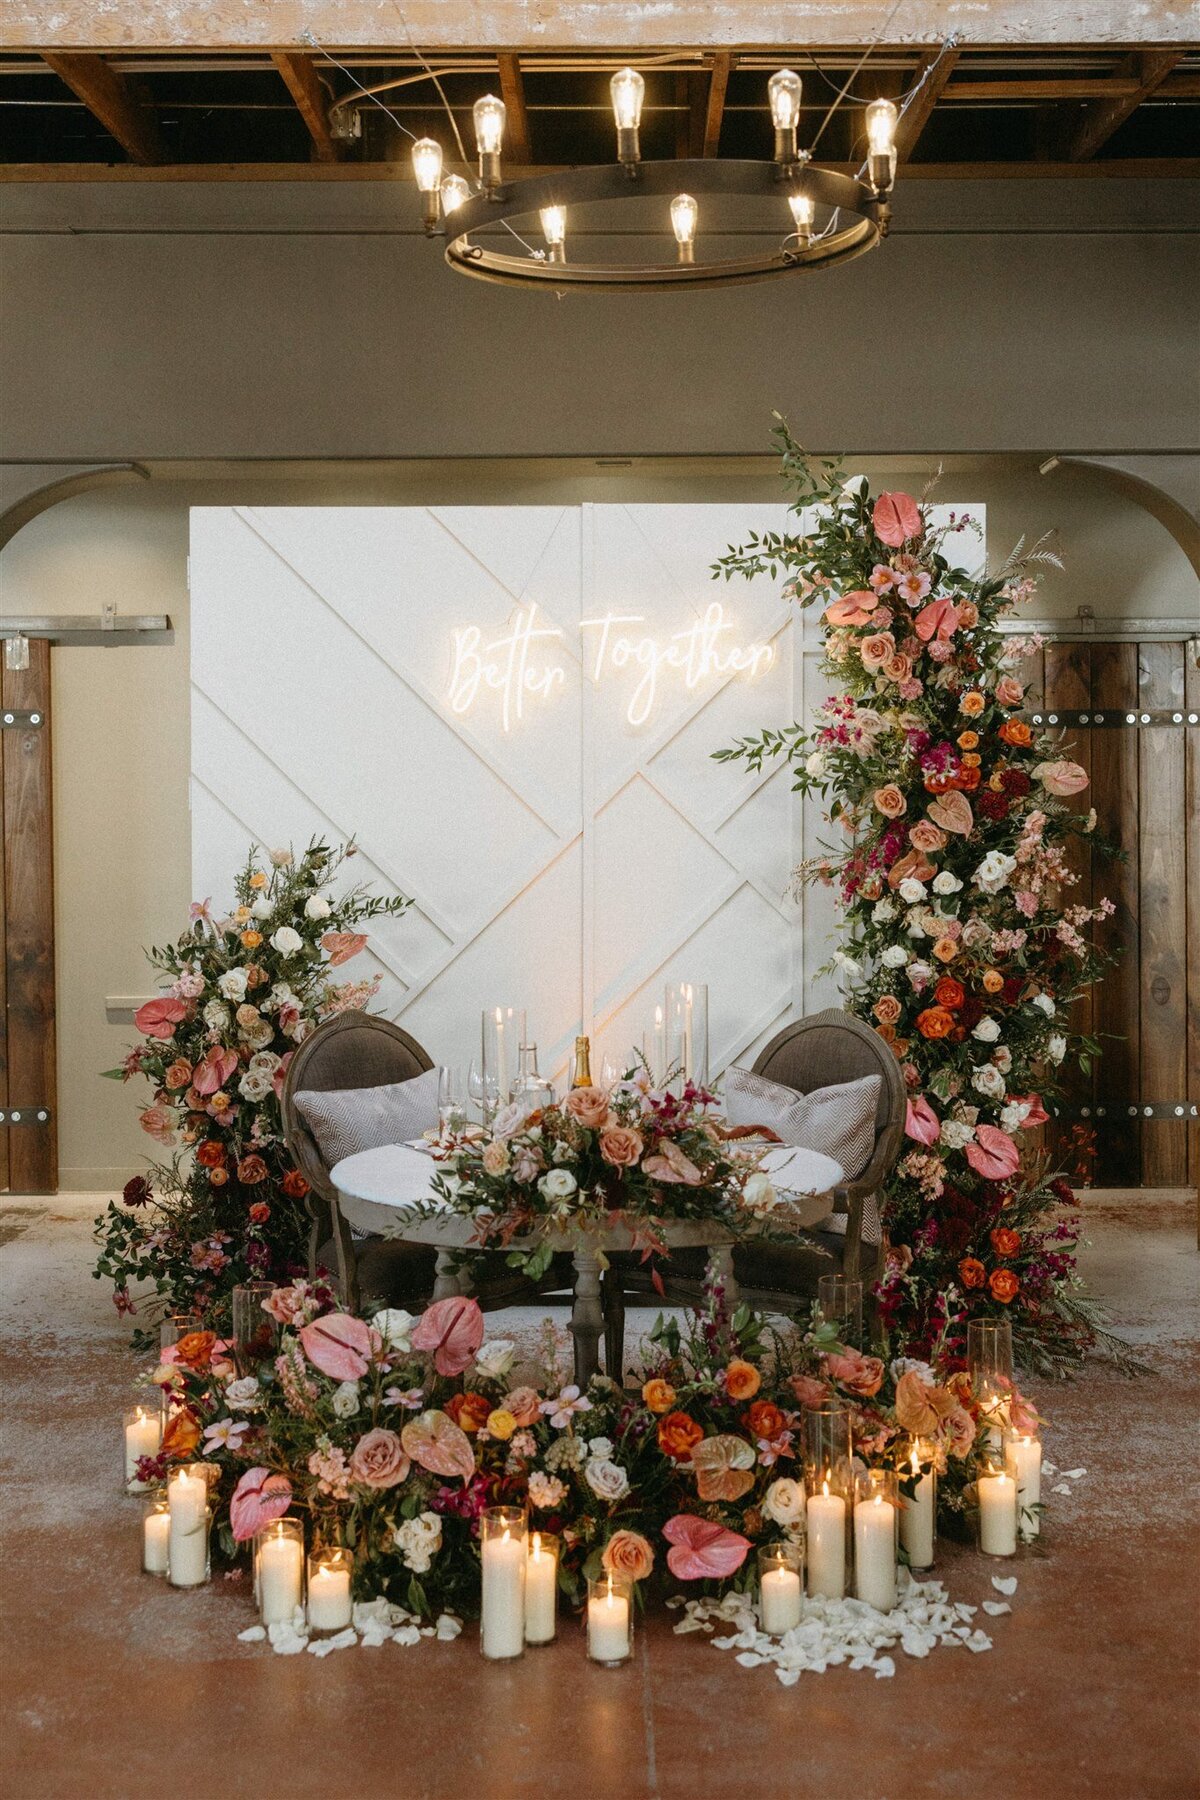 White ceremony backdrop surrounded by colorful florals in crimson, pink and white with candles